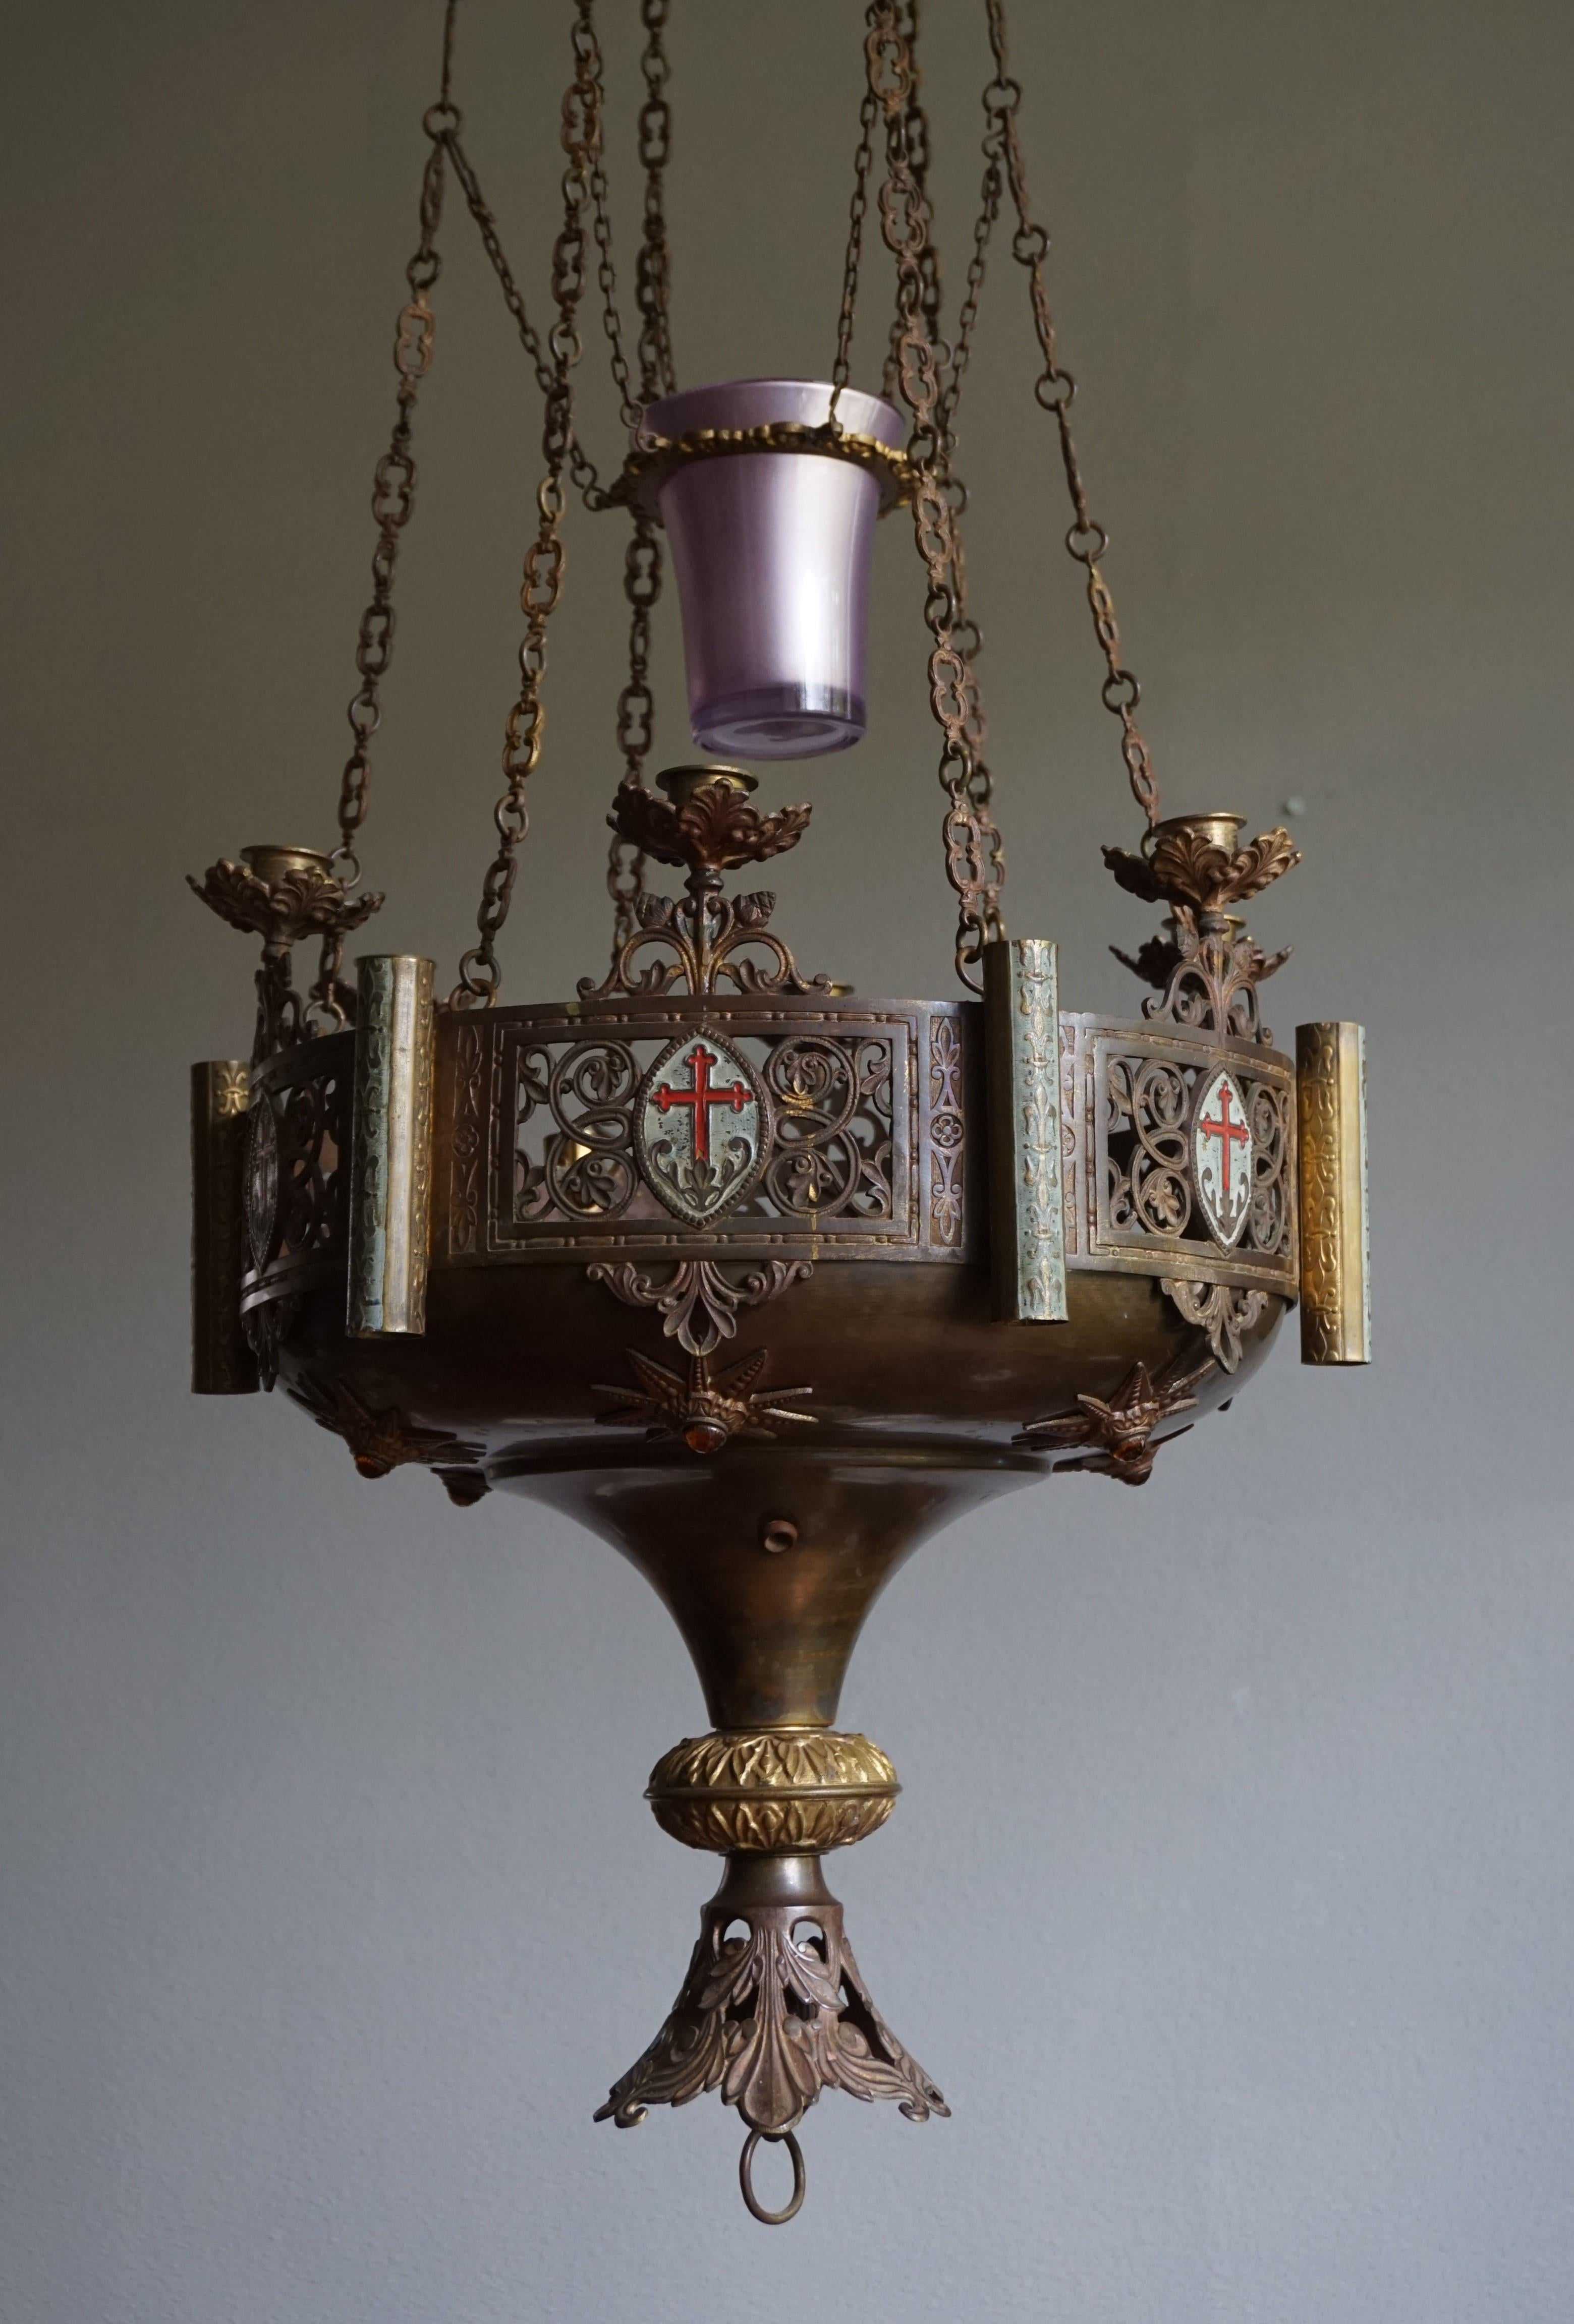 Impressive, seven light Gothic chandelier from the 1800s.

This rare and beautiful looking church chandelier is another one of our recent great finds. The design with all the amazing, handcrafted bronze details and the ancient patina makes this